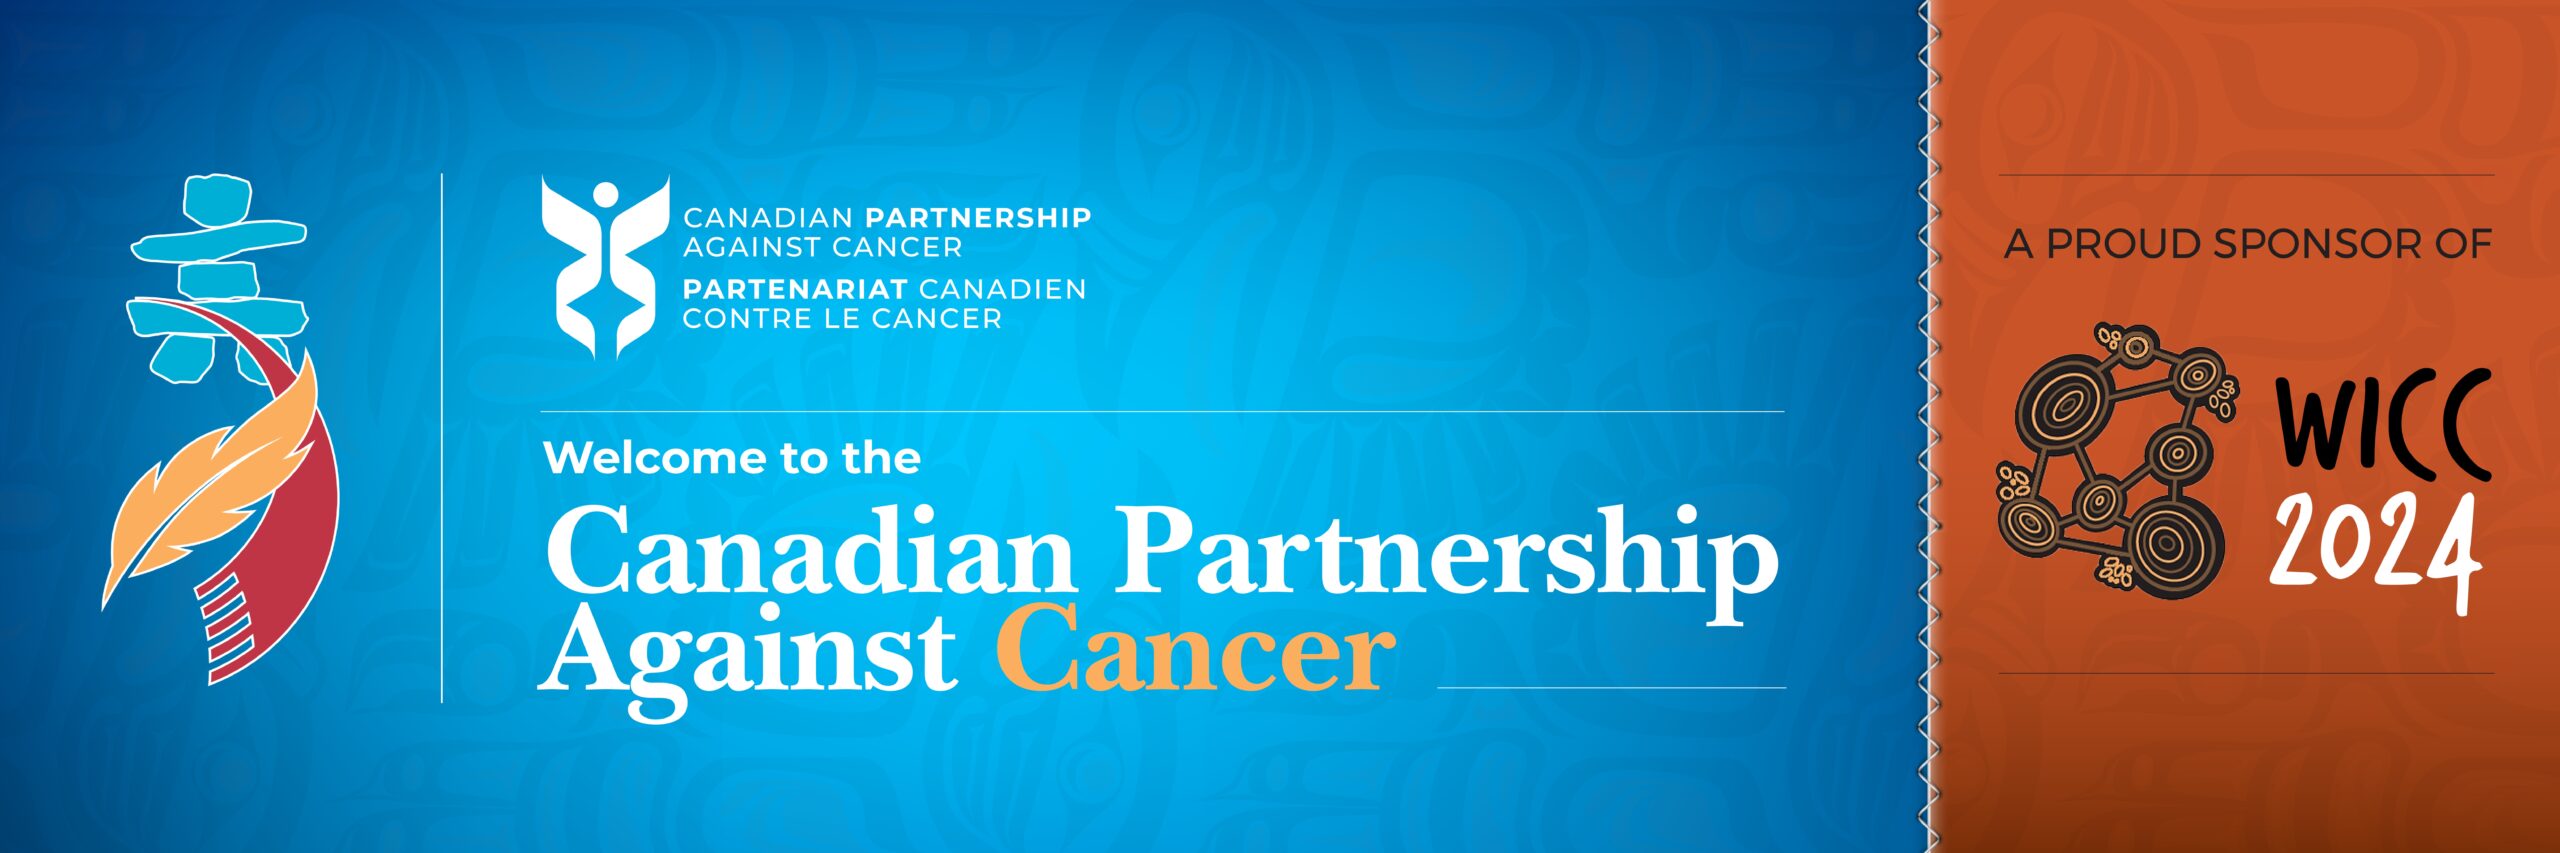 Welcome to the Canadian Partnership Against Cancer. A proud sponsor of WICC 2024.